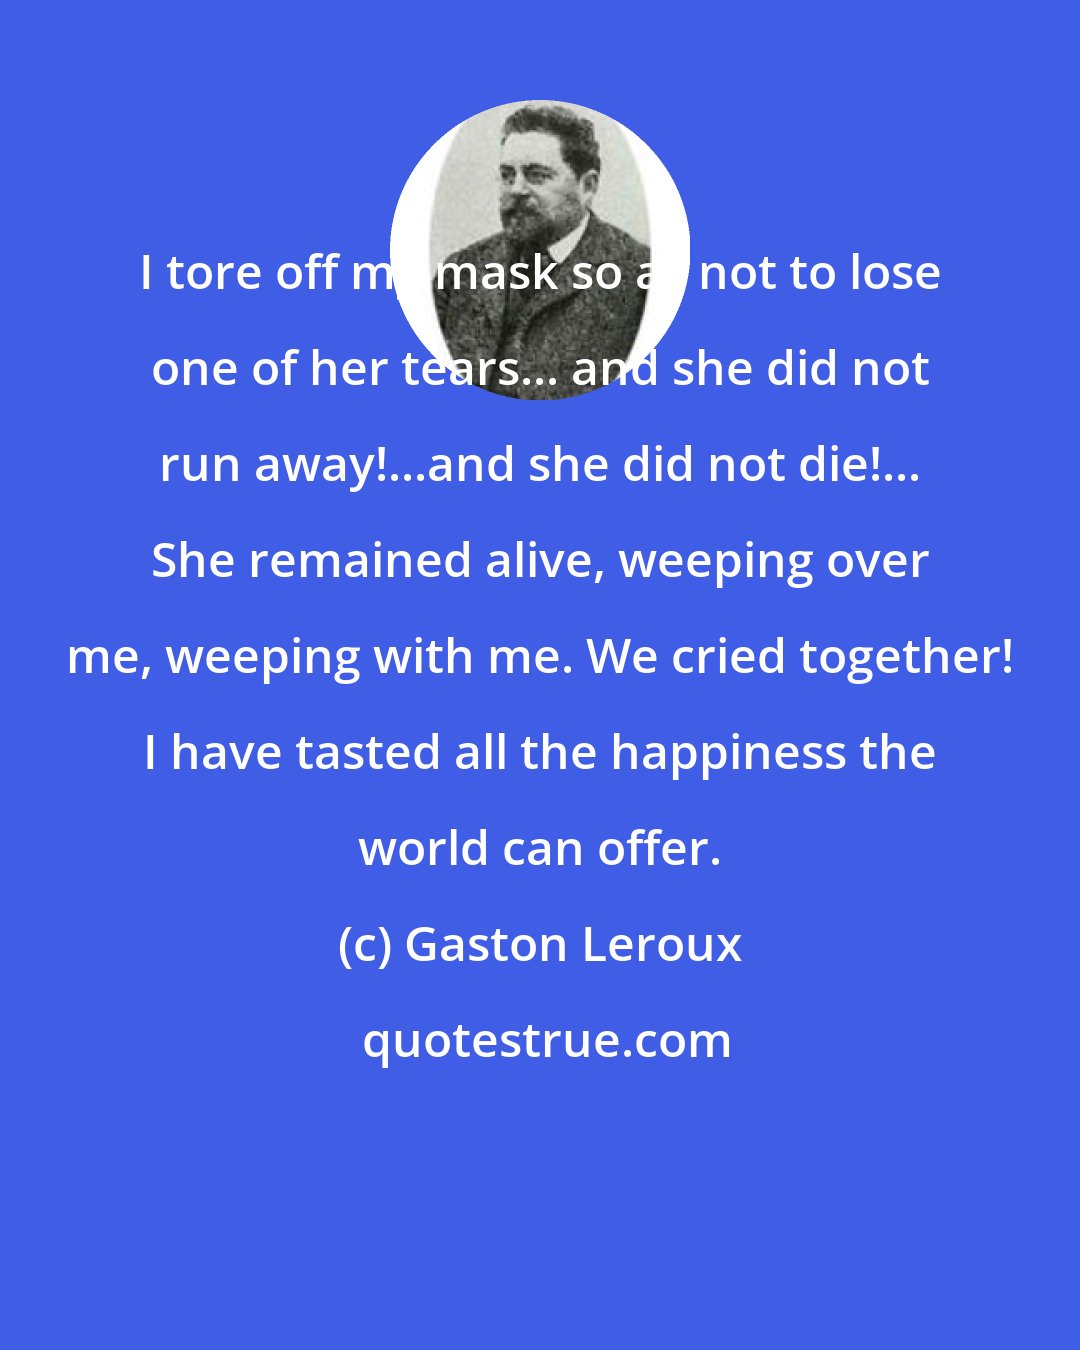 Gaston Leroux: I tore off my mask so as not to lose one of her tears... and she did not run away!...and she did not die!... She remained alive, weeping over me, weeping with me. We cried together! I have tasted all the happiness the world can offer.